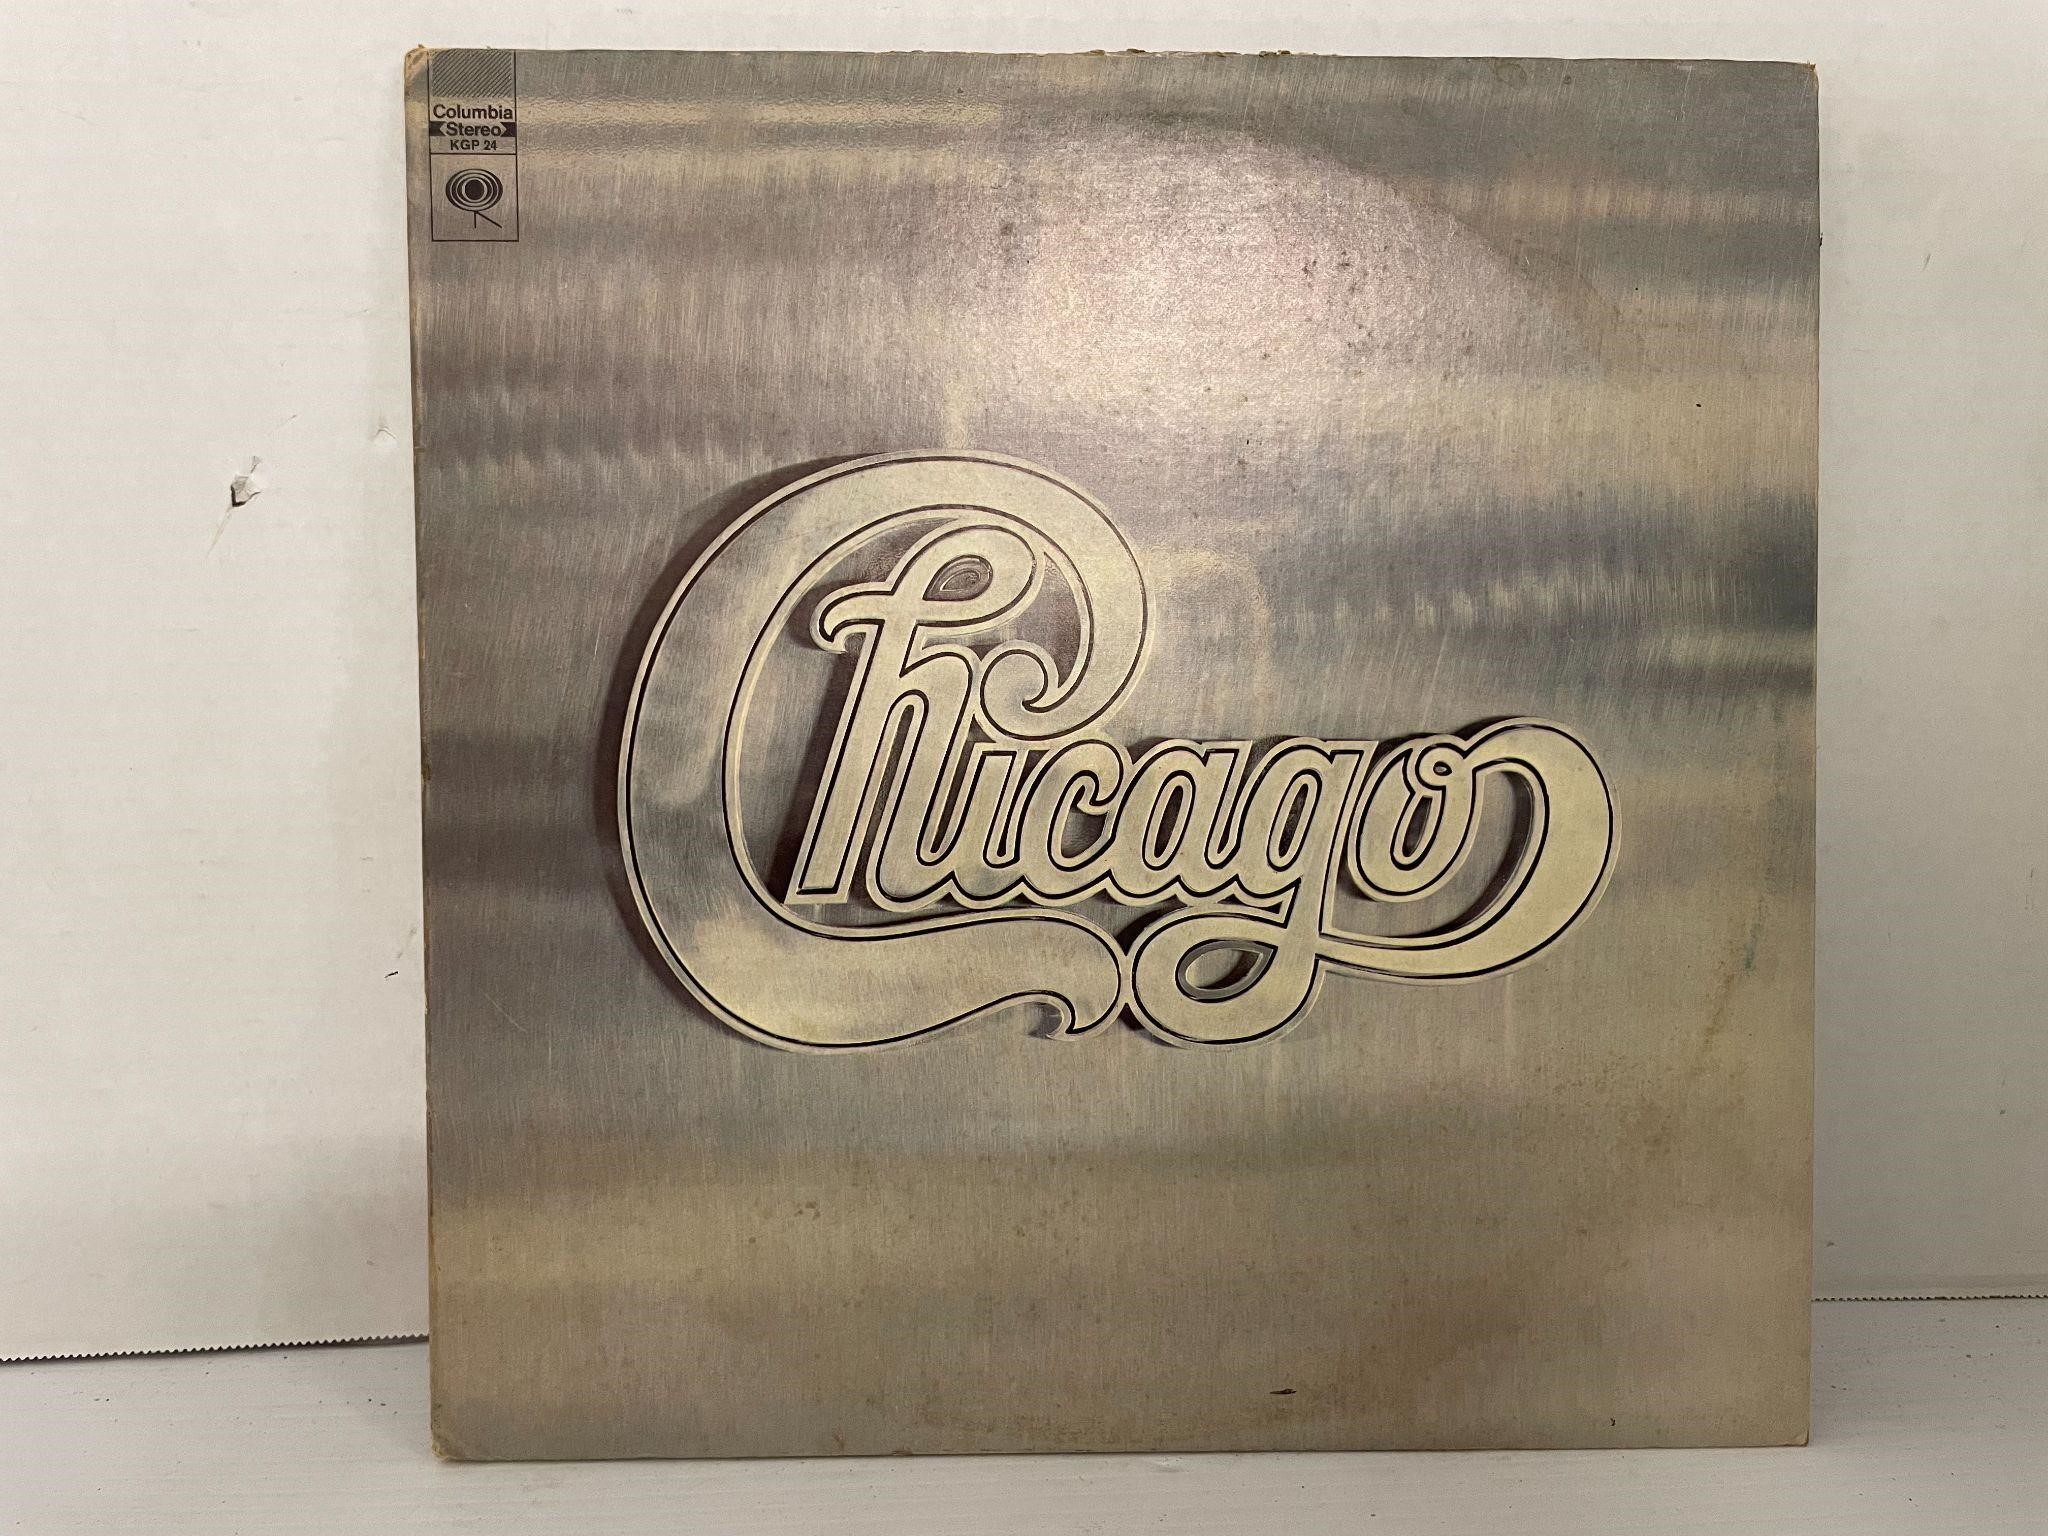 Chicago (self-titled)